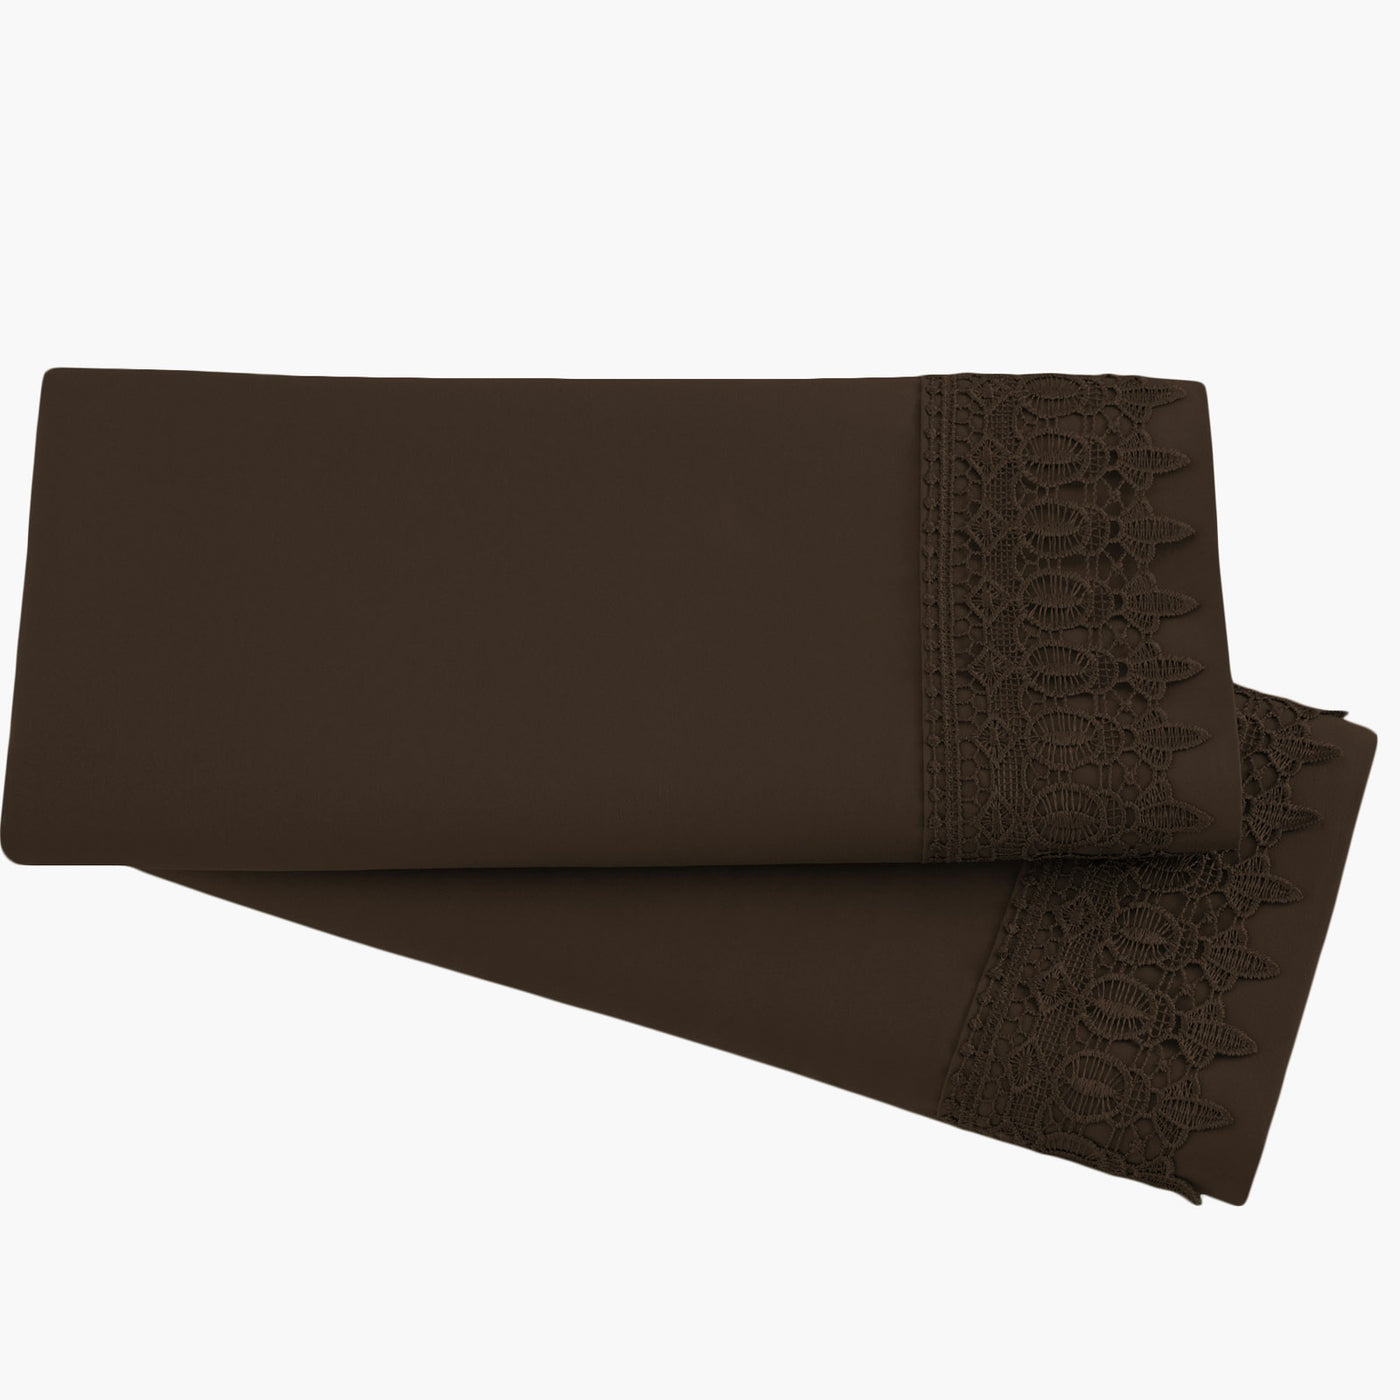 2-Piece Lace Pillowcase Set in Brown